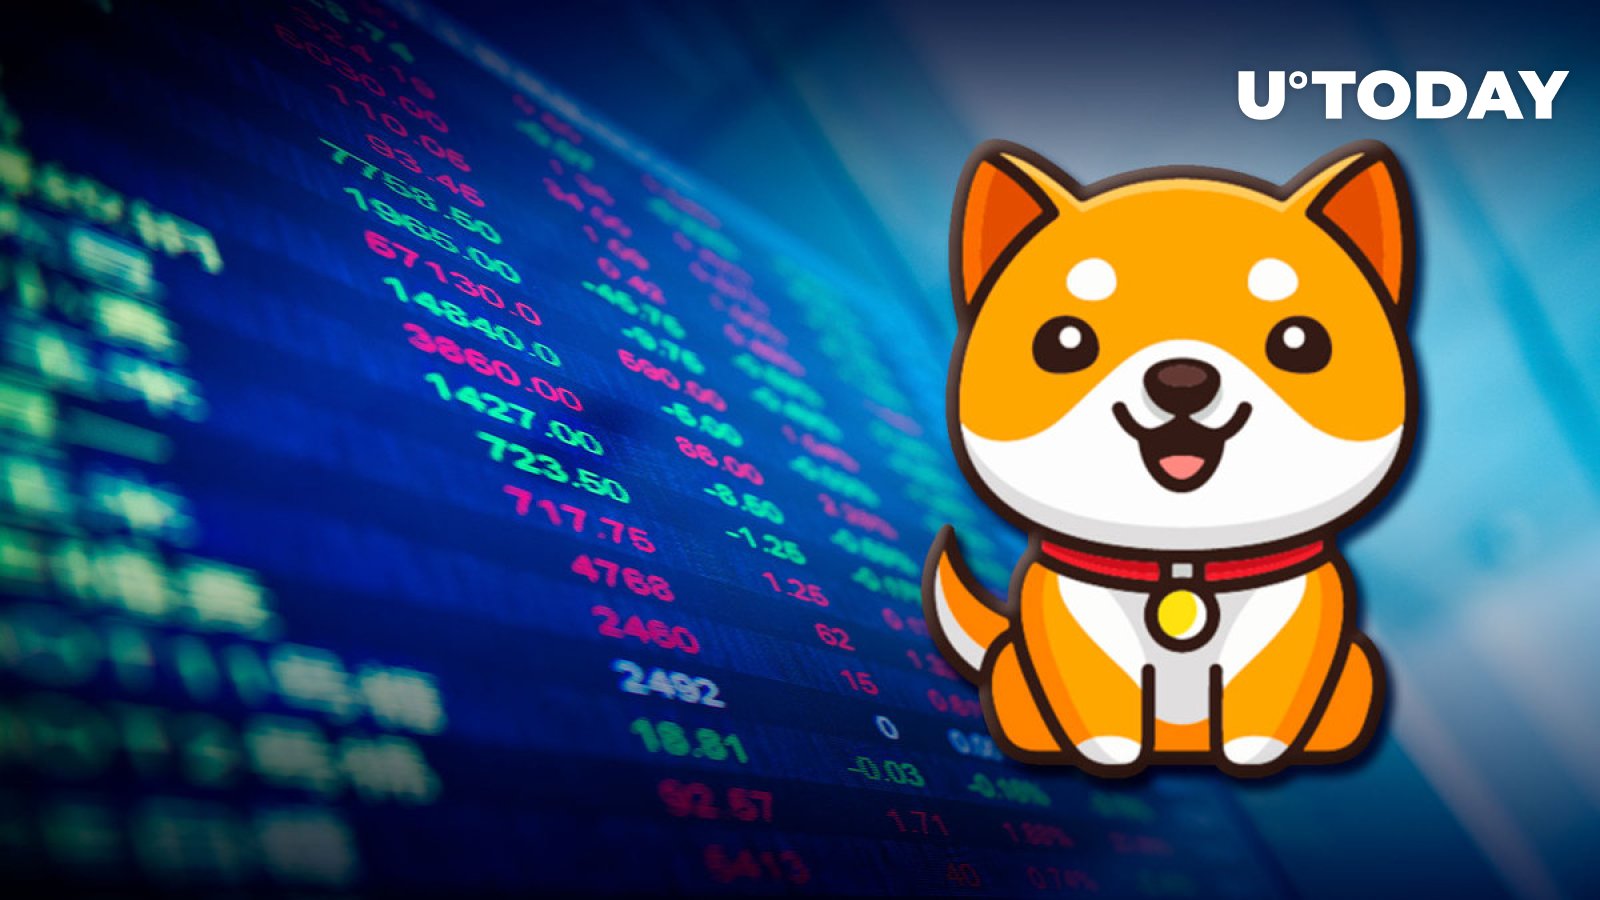 BabyDoge Coin Listed on This Major Exchange: Details